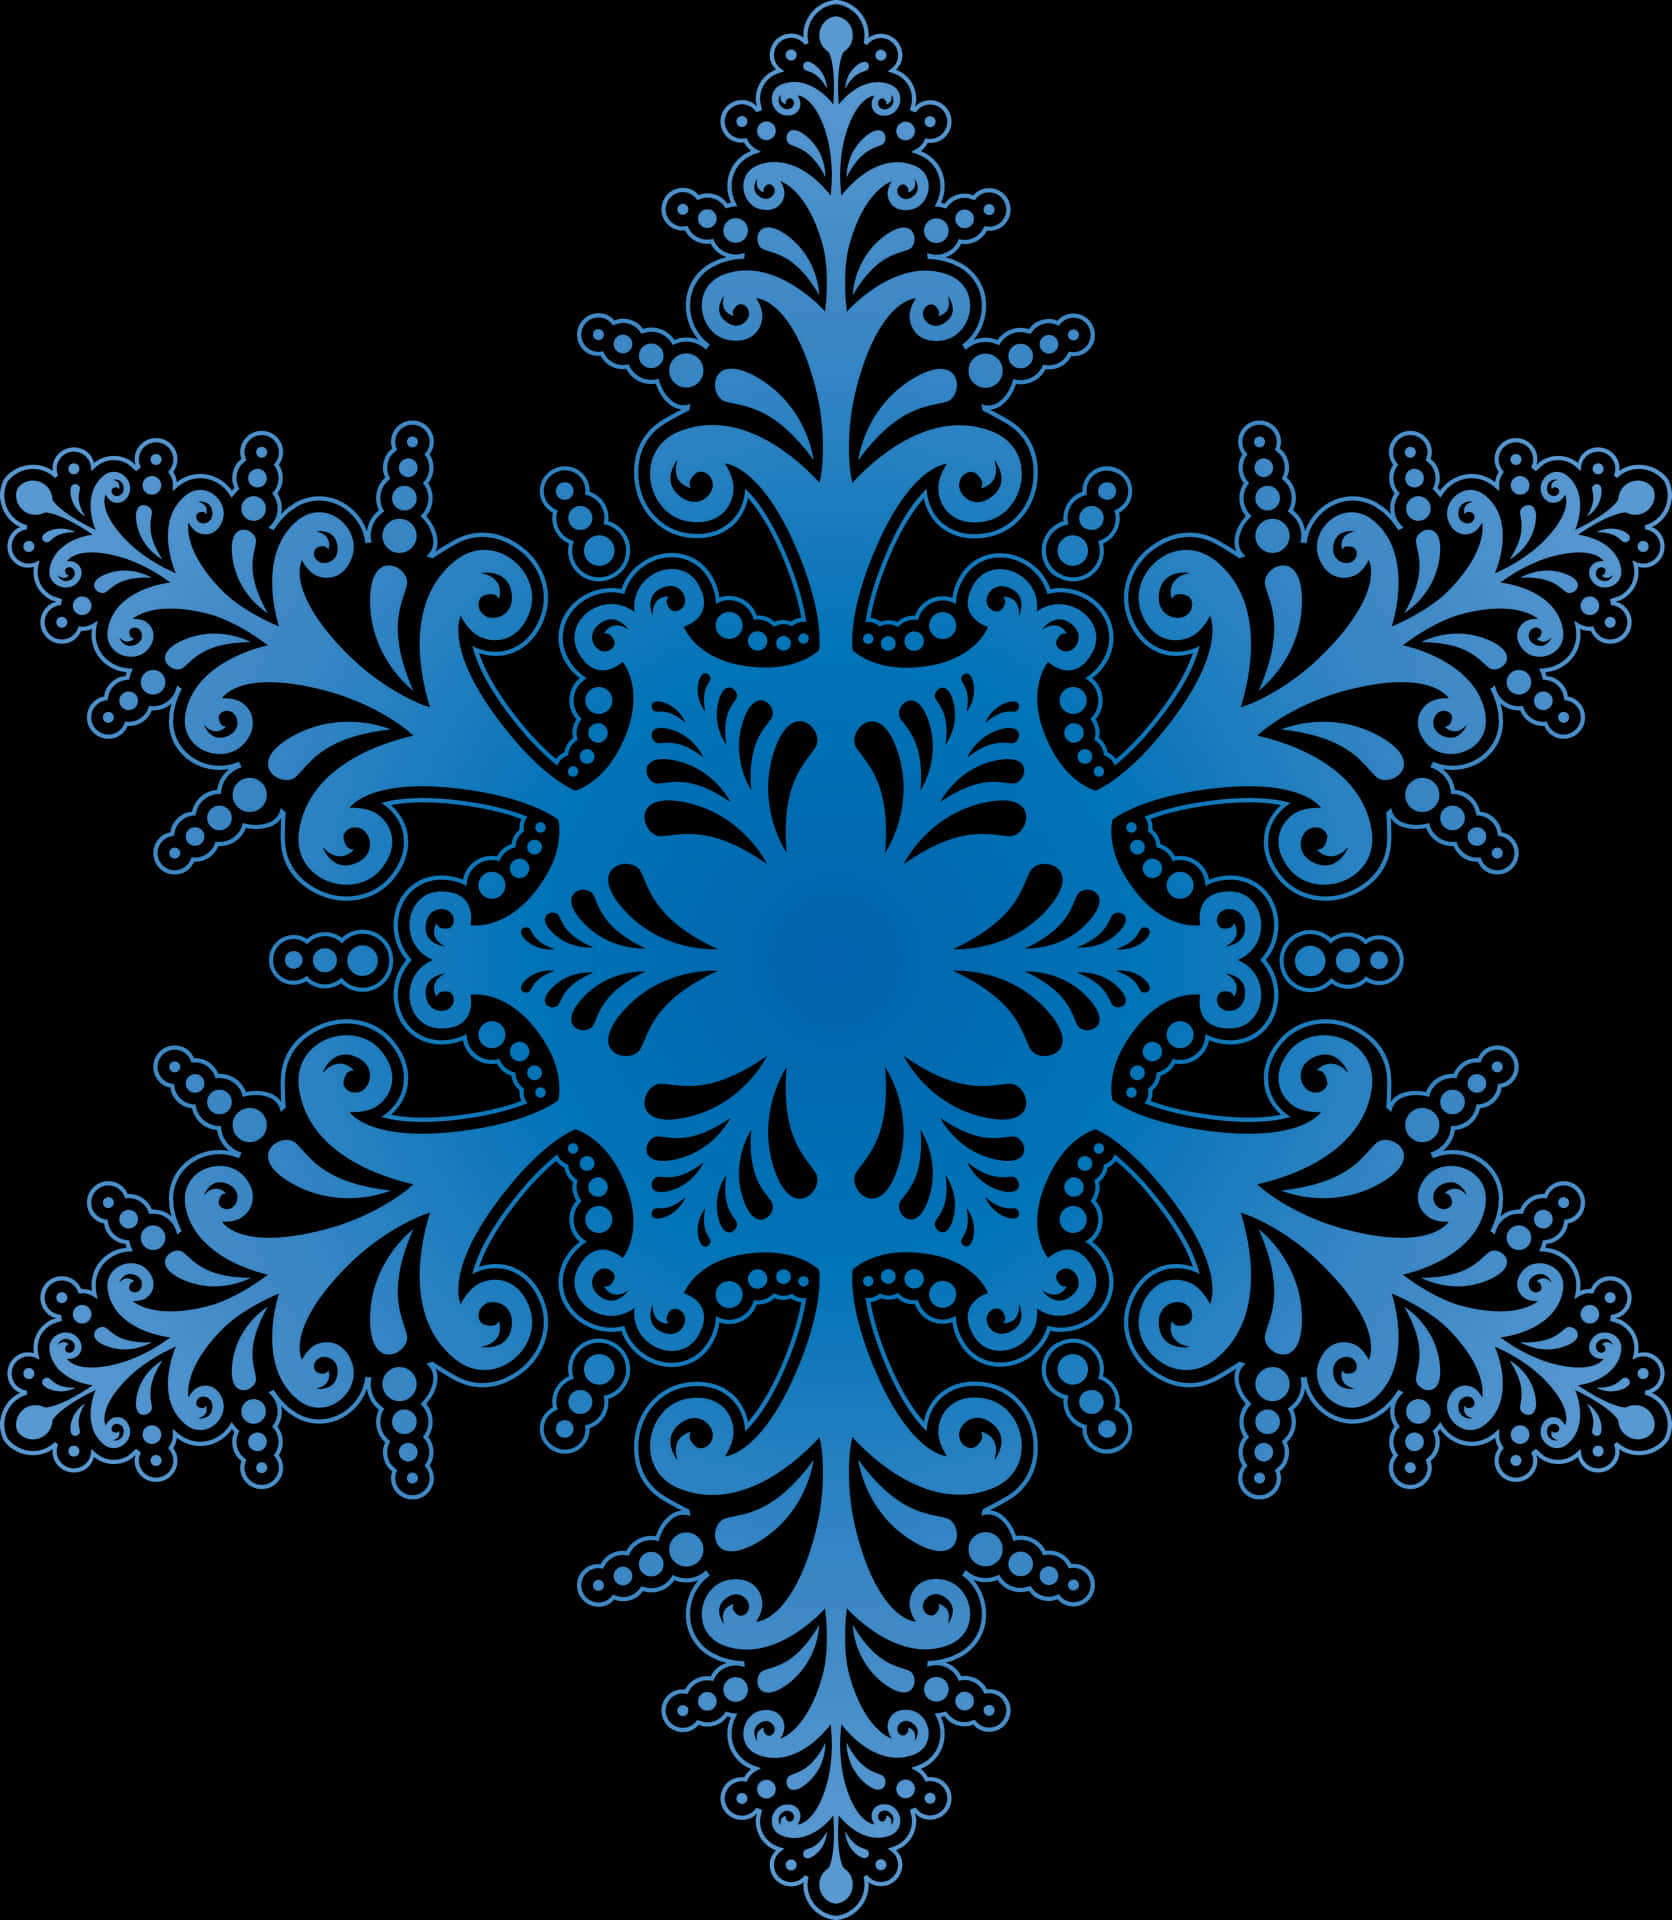 Intricate Blue Snowflake Design PNG